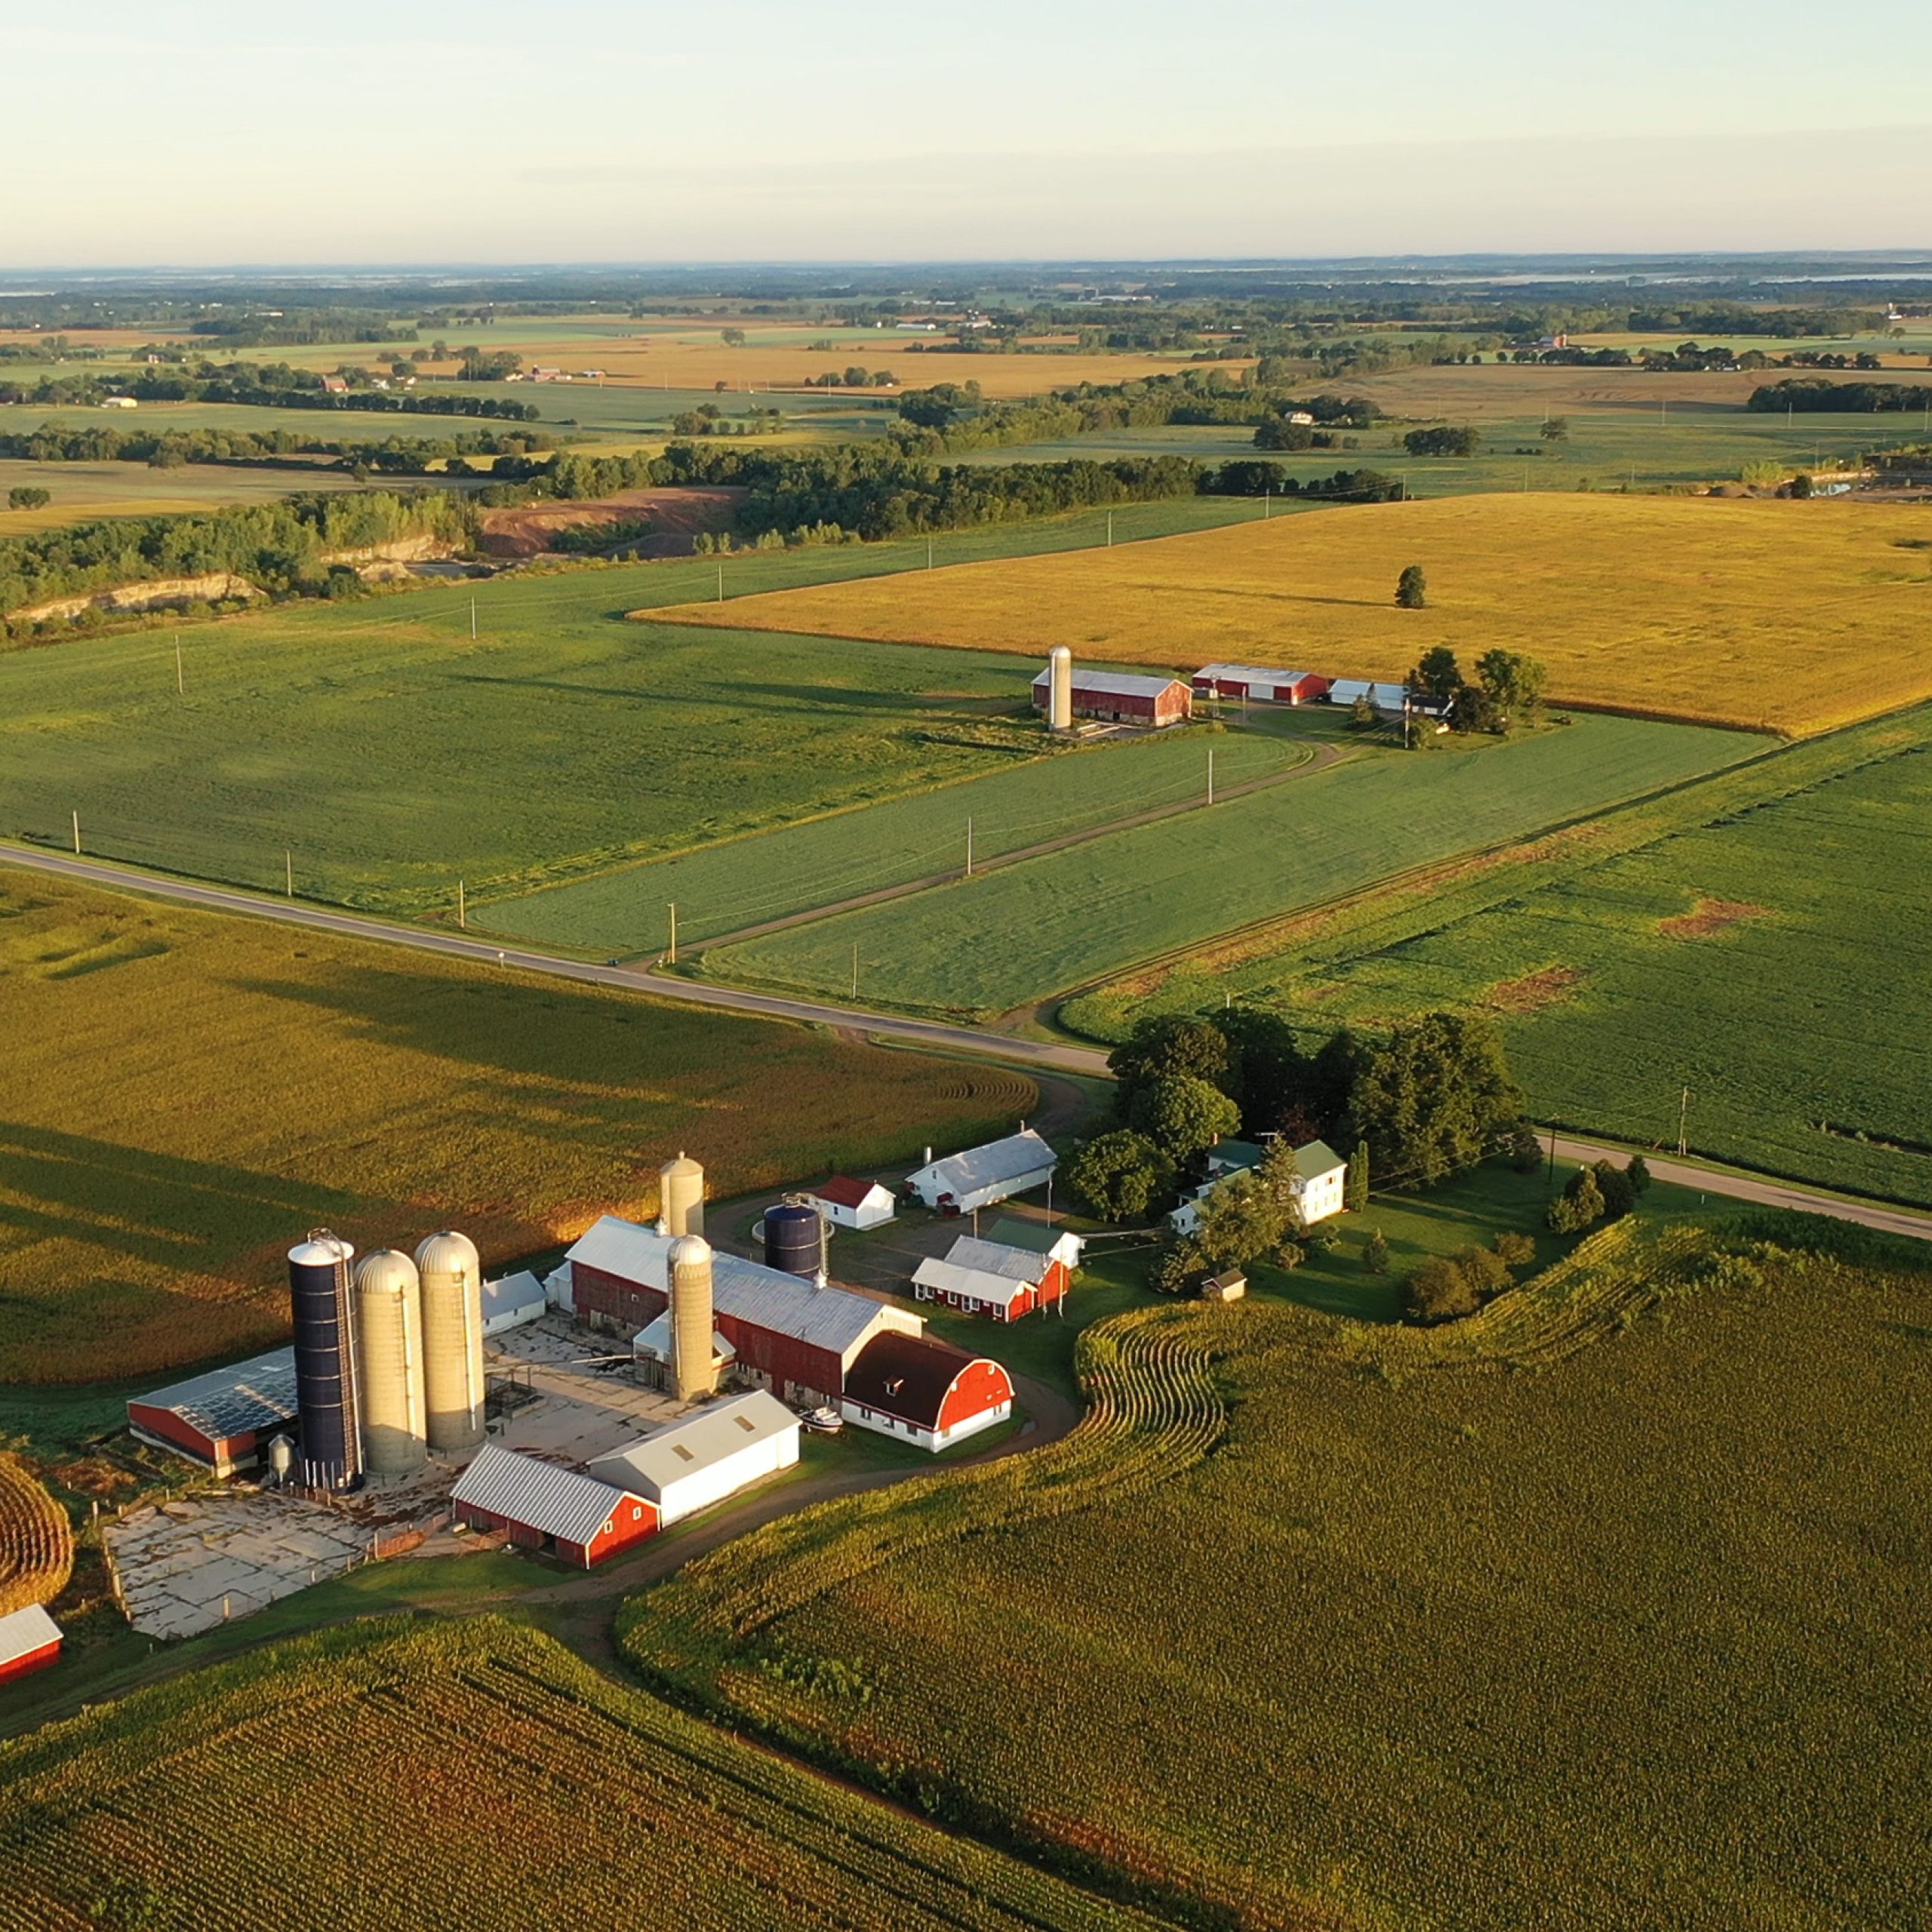 Aerial view of farm, red barns, corn field in September. Harvest season. Rural landscape, american countryside. Sunny morning